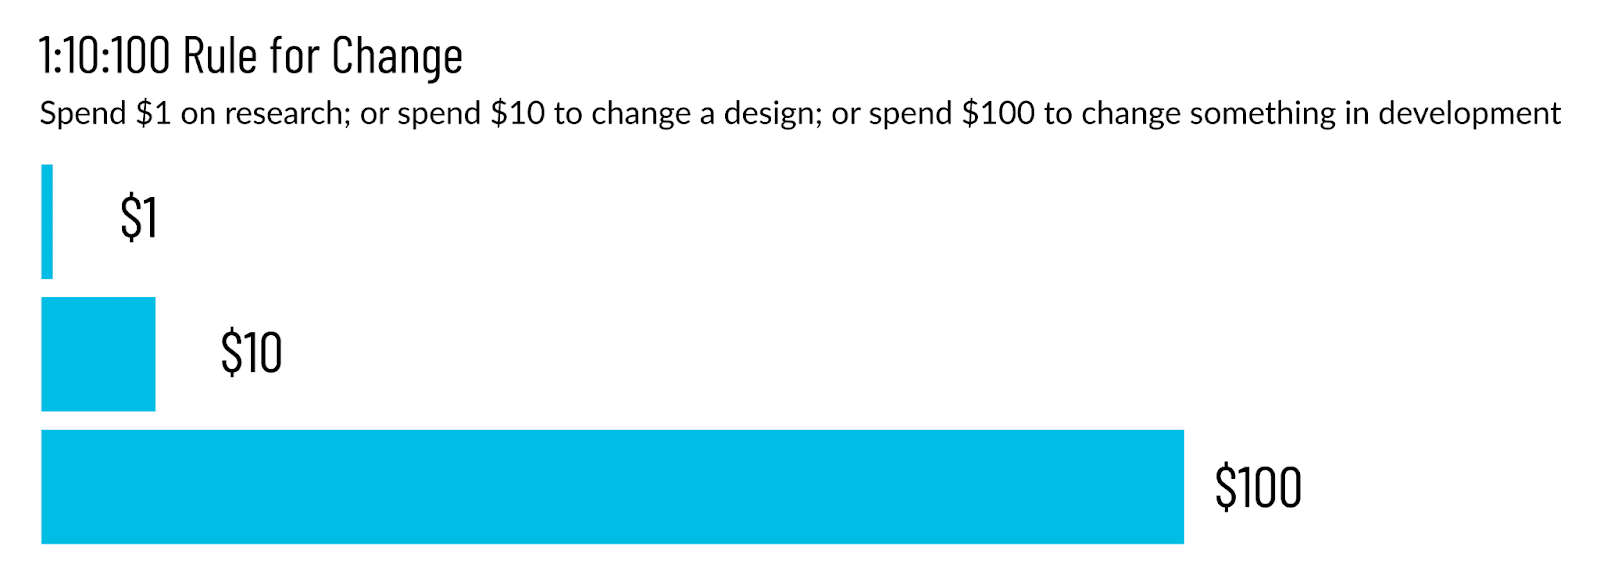 "Spend $1 on research; or spend $10 to change a design' or spend $100 to change something in development."